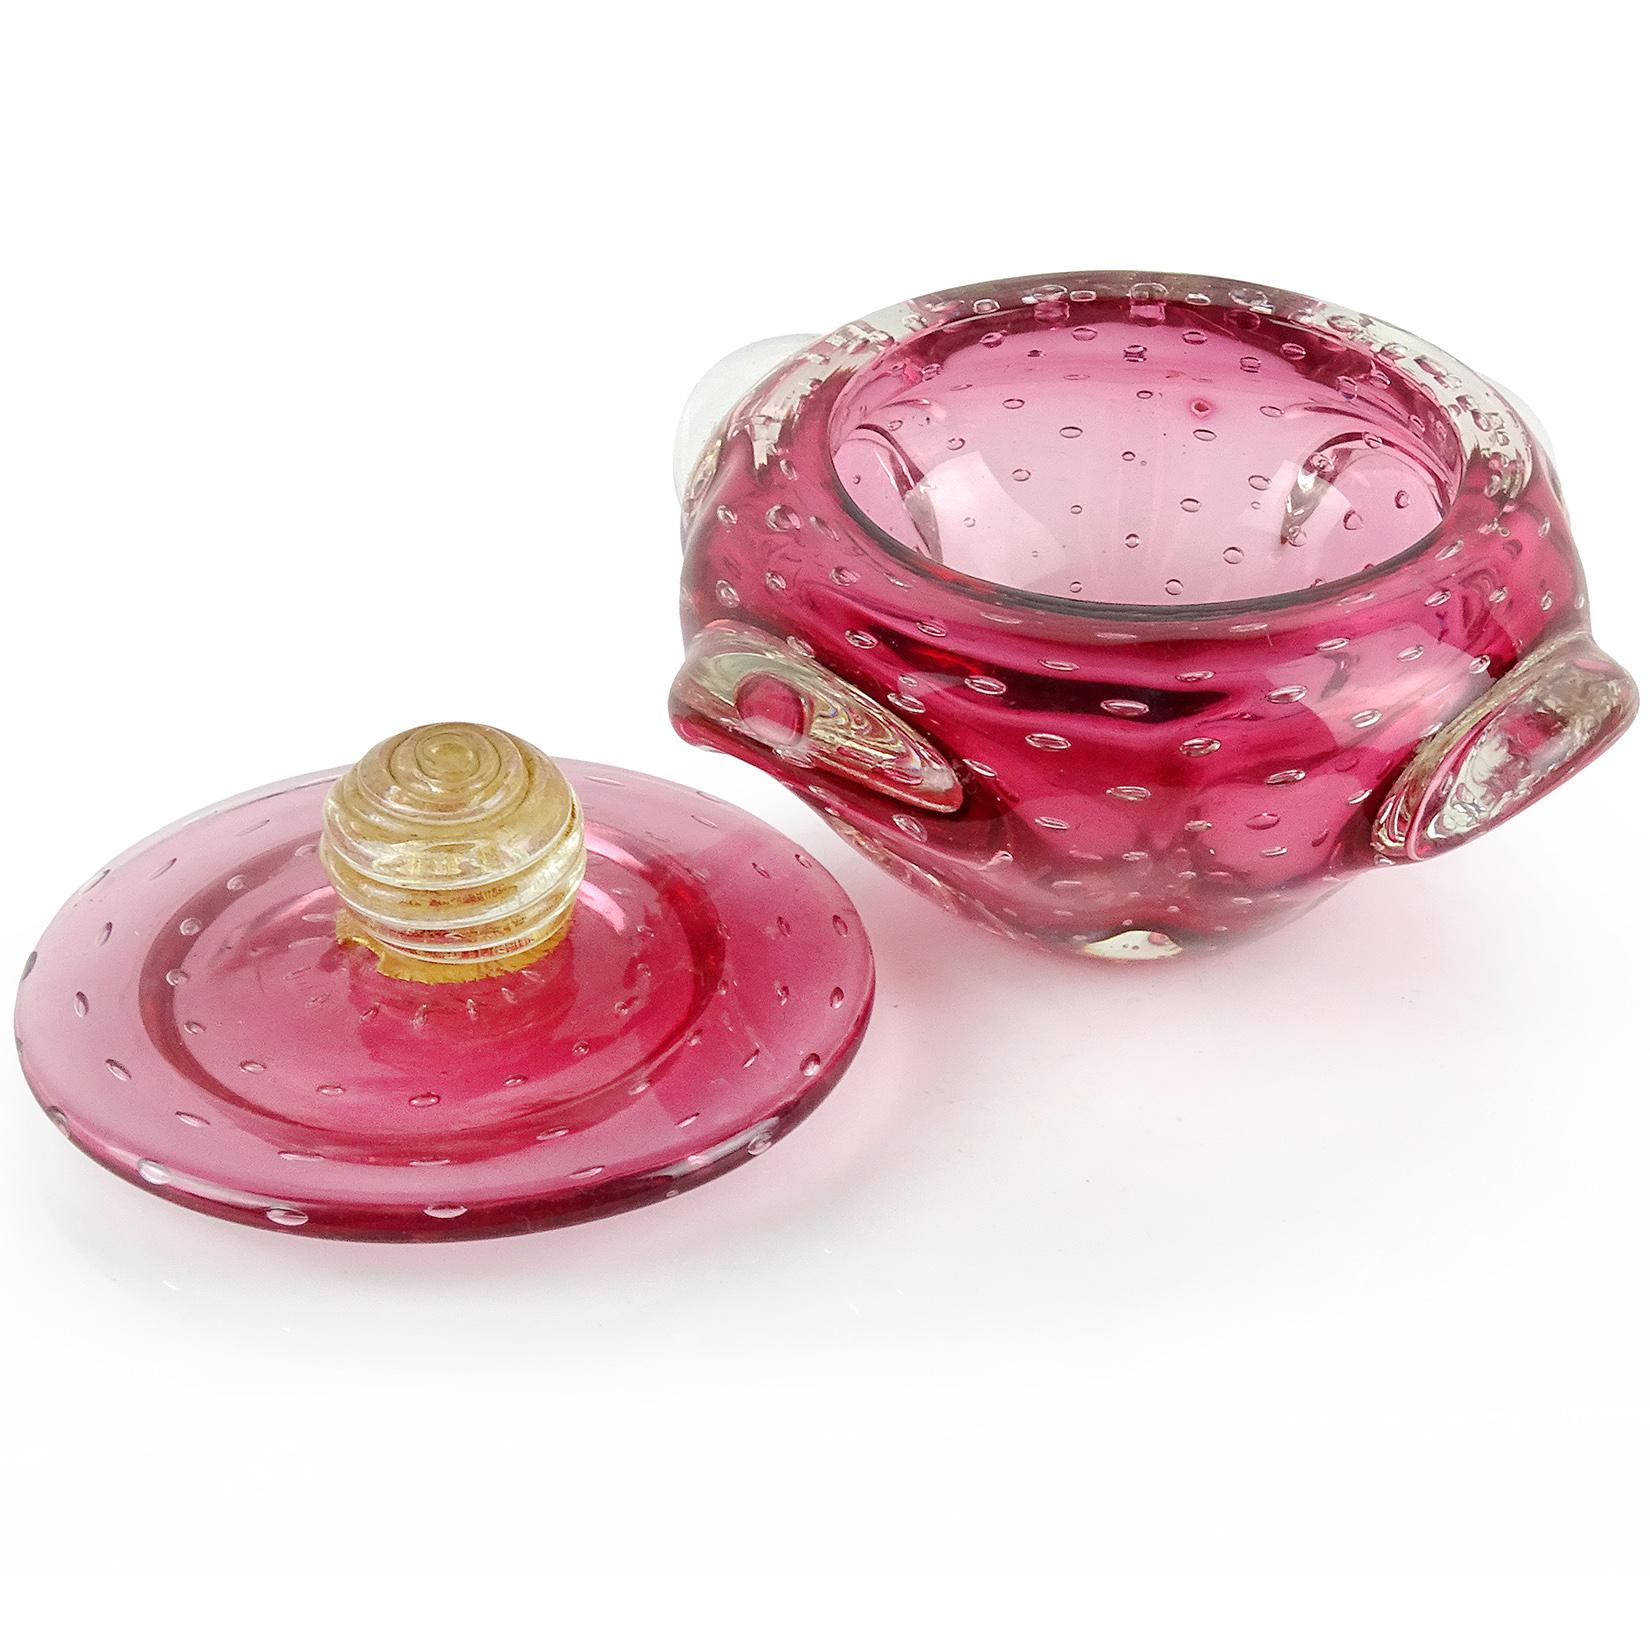 Beautiful vintage Murano hand blown transparent reddish pink and controlled bubbles Italian art glass powder or jewelry box. The lidded jar has pulled glass on the sides, with a swirled gold leaf ball at the top of the lid. Great decorative piece